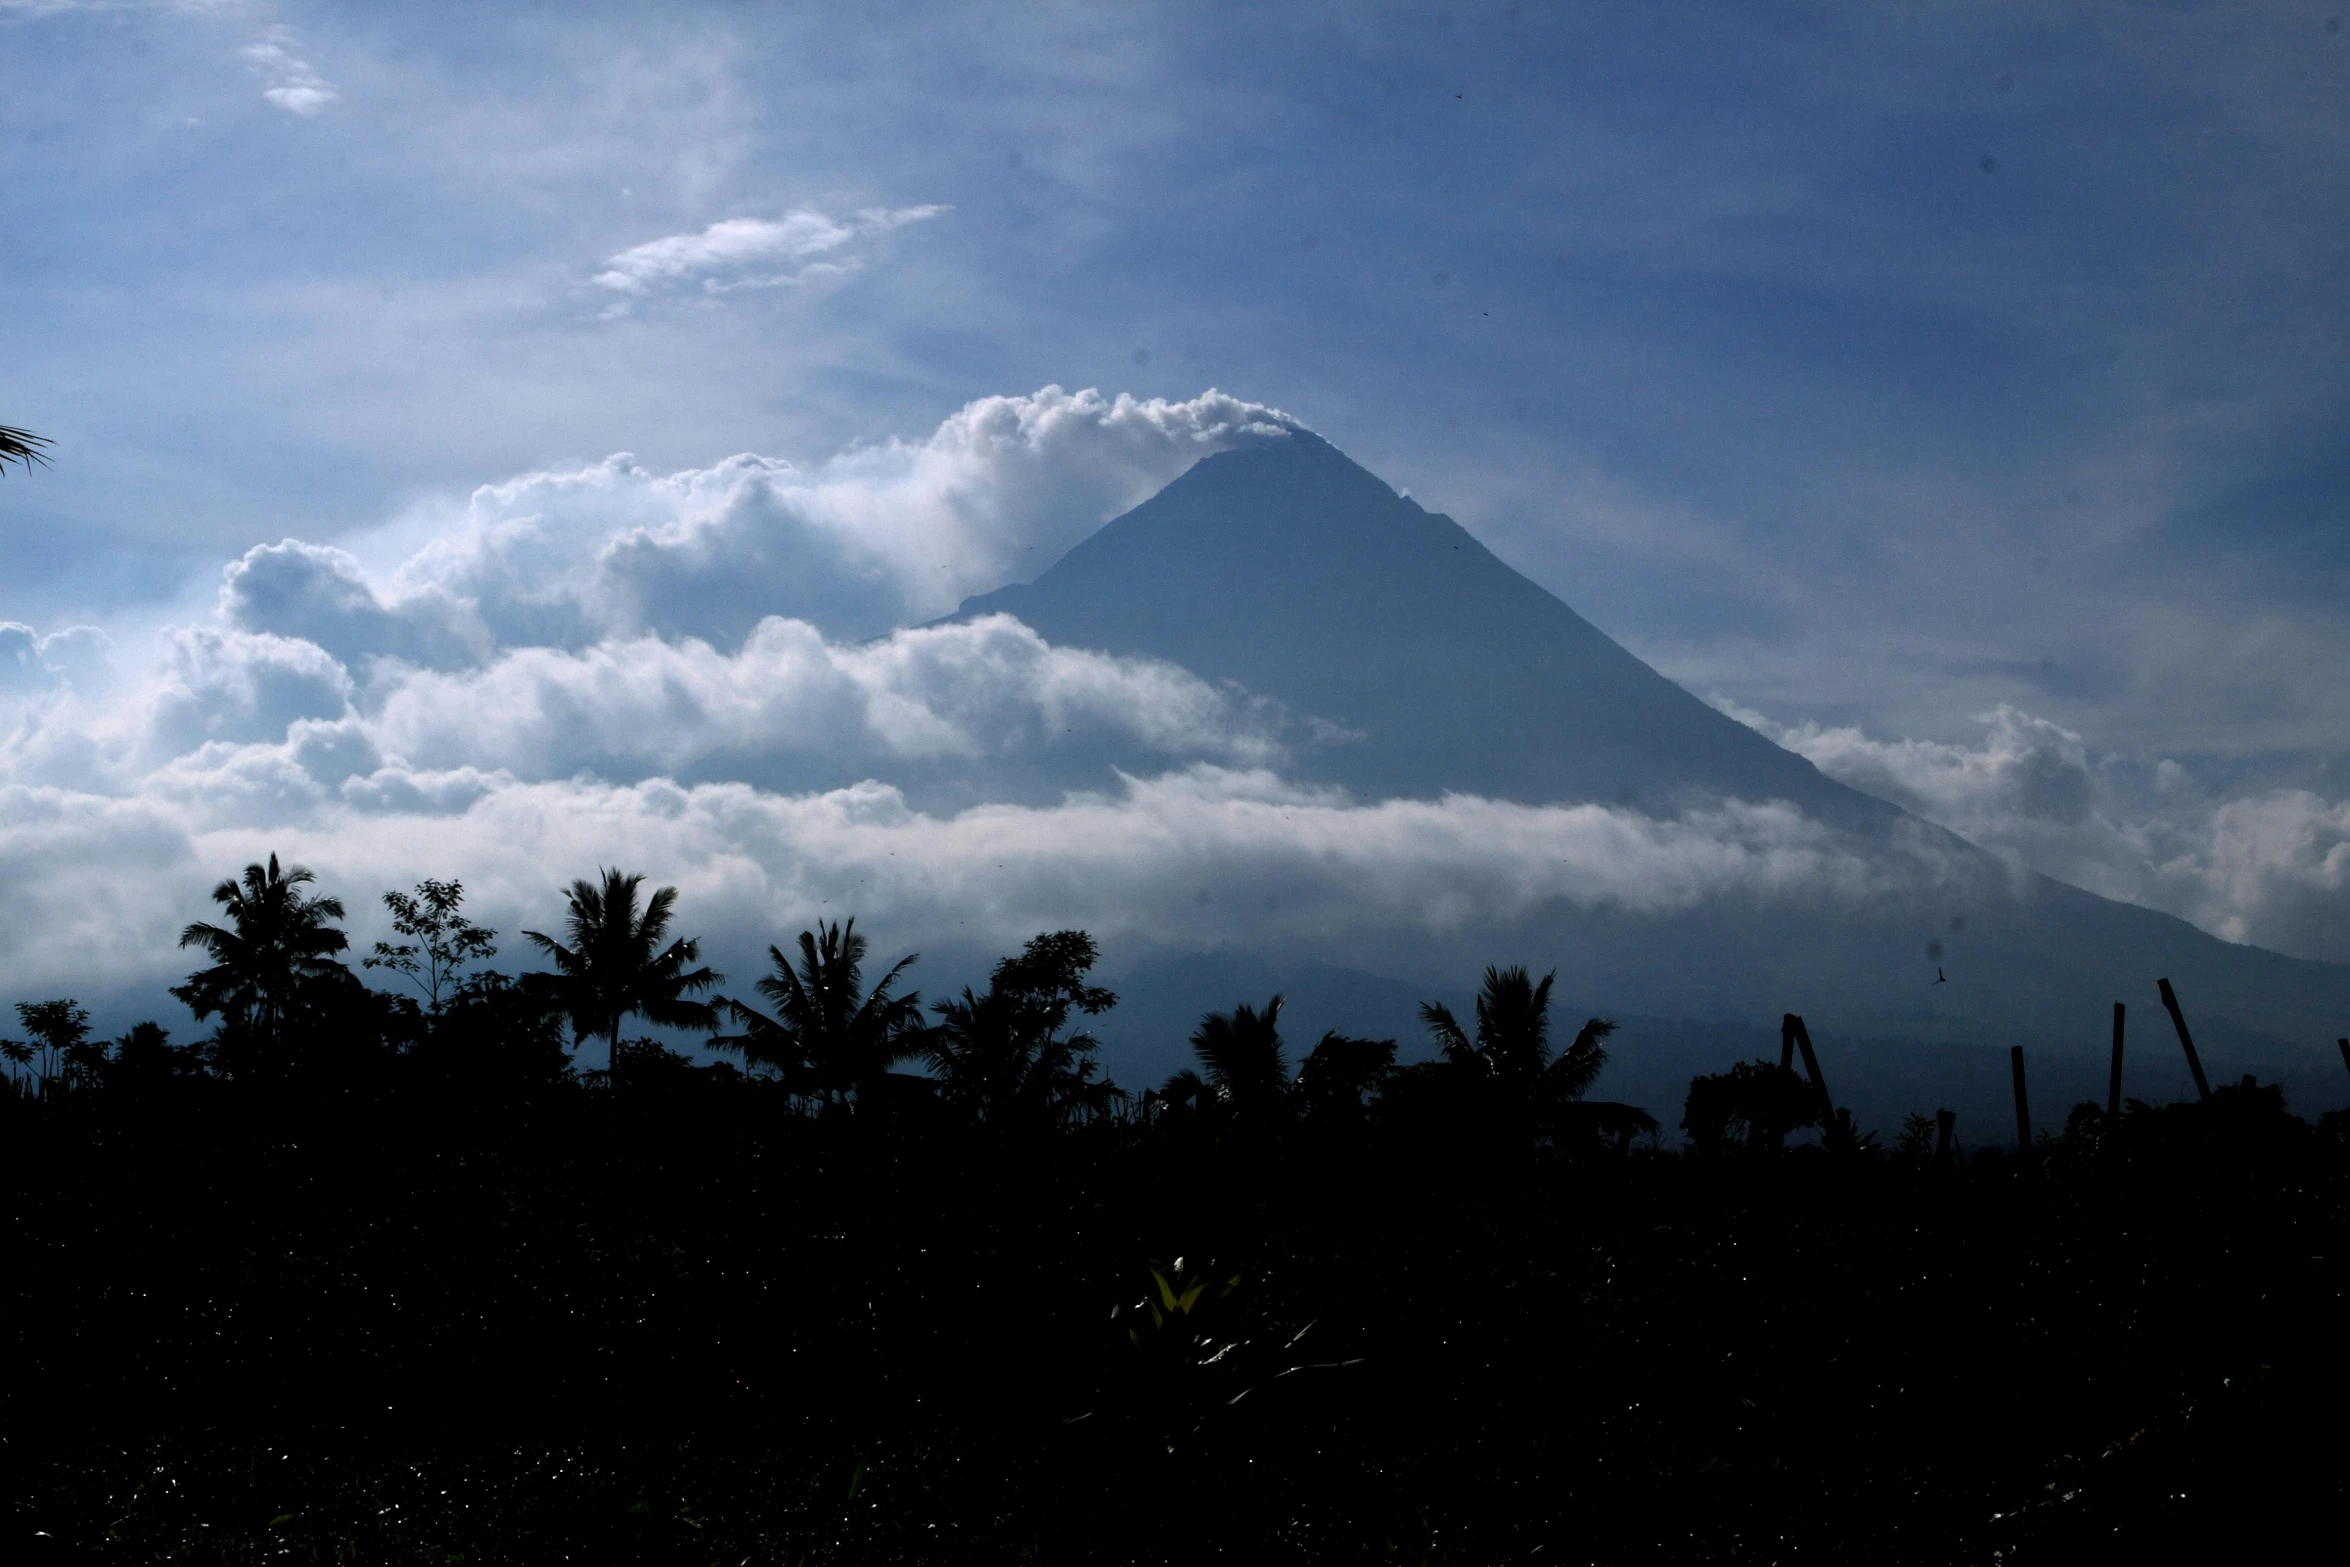 a view of a mountain with clouds in the sky, sumatraism, avatar image, photographed for reuters, bali, thumbnail